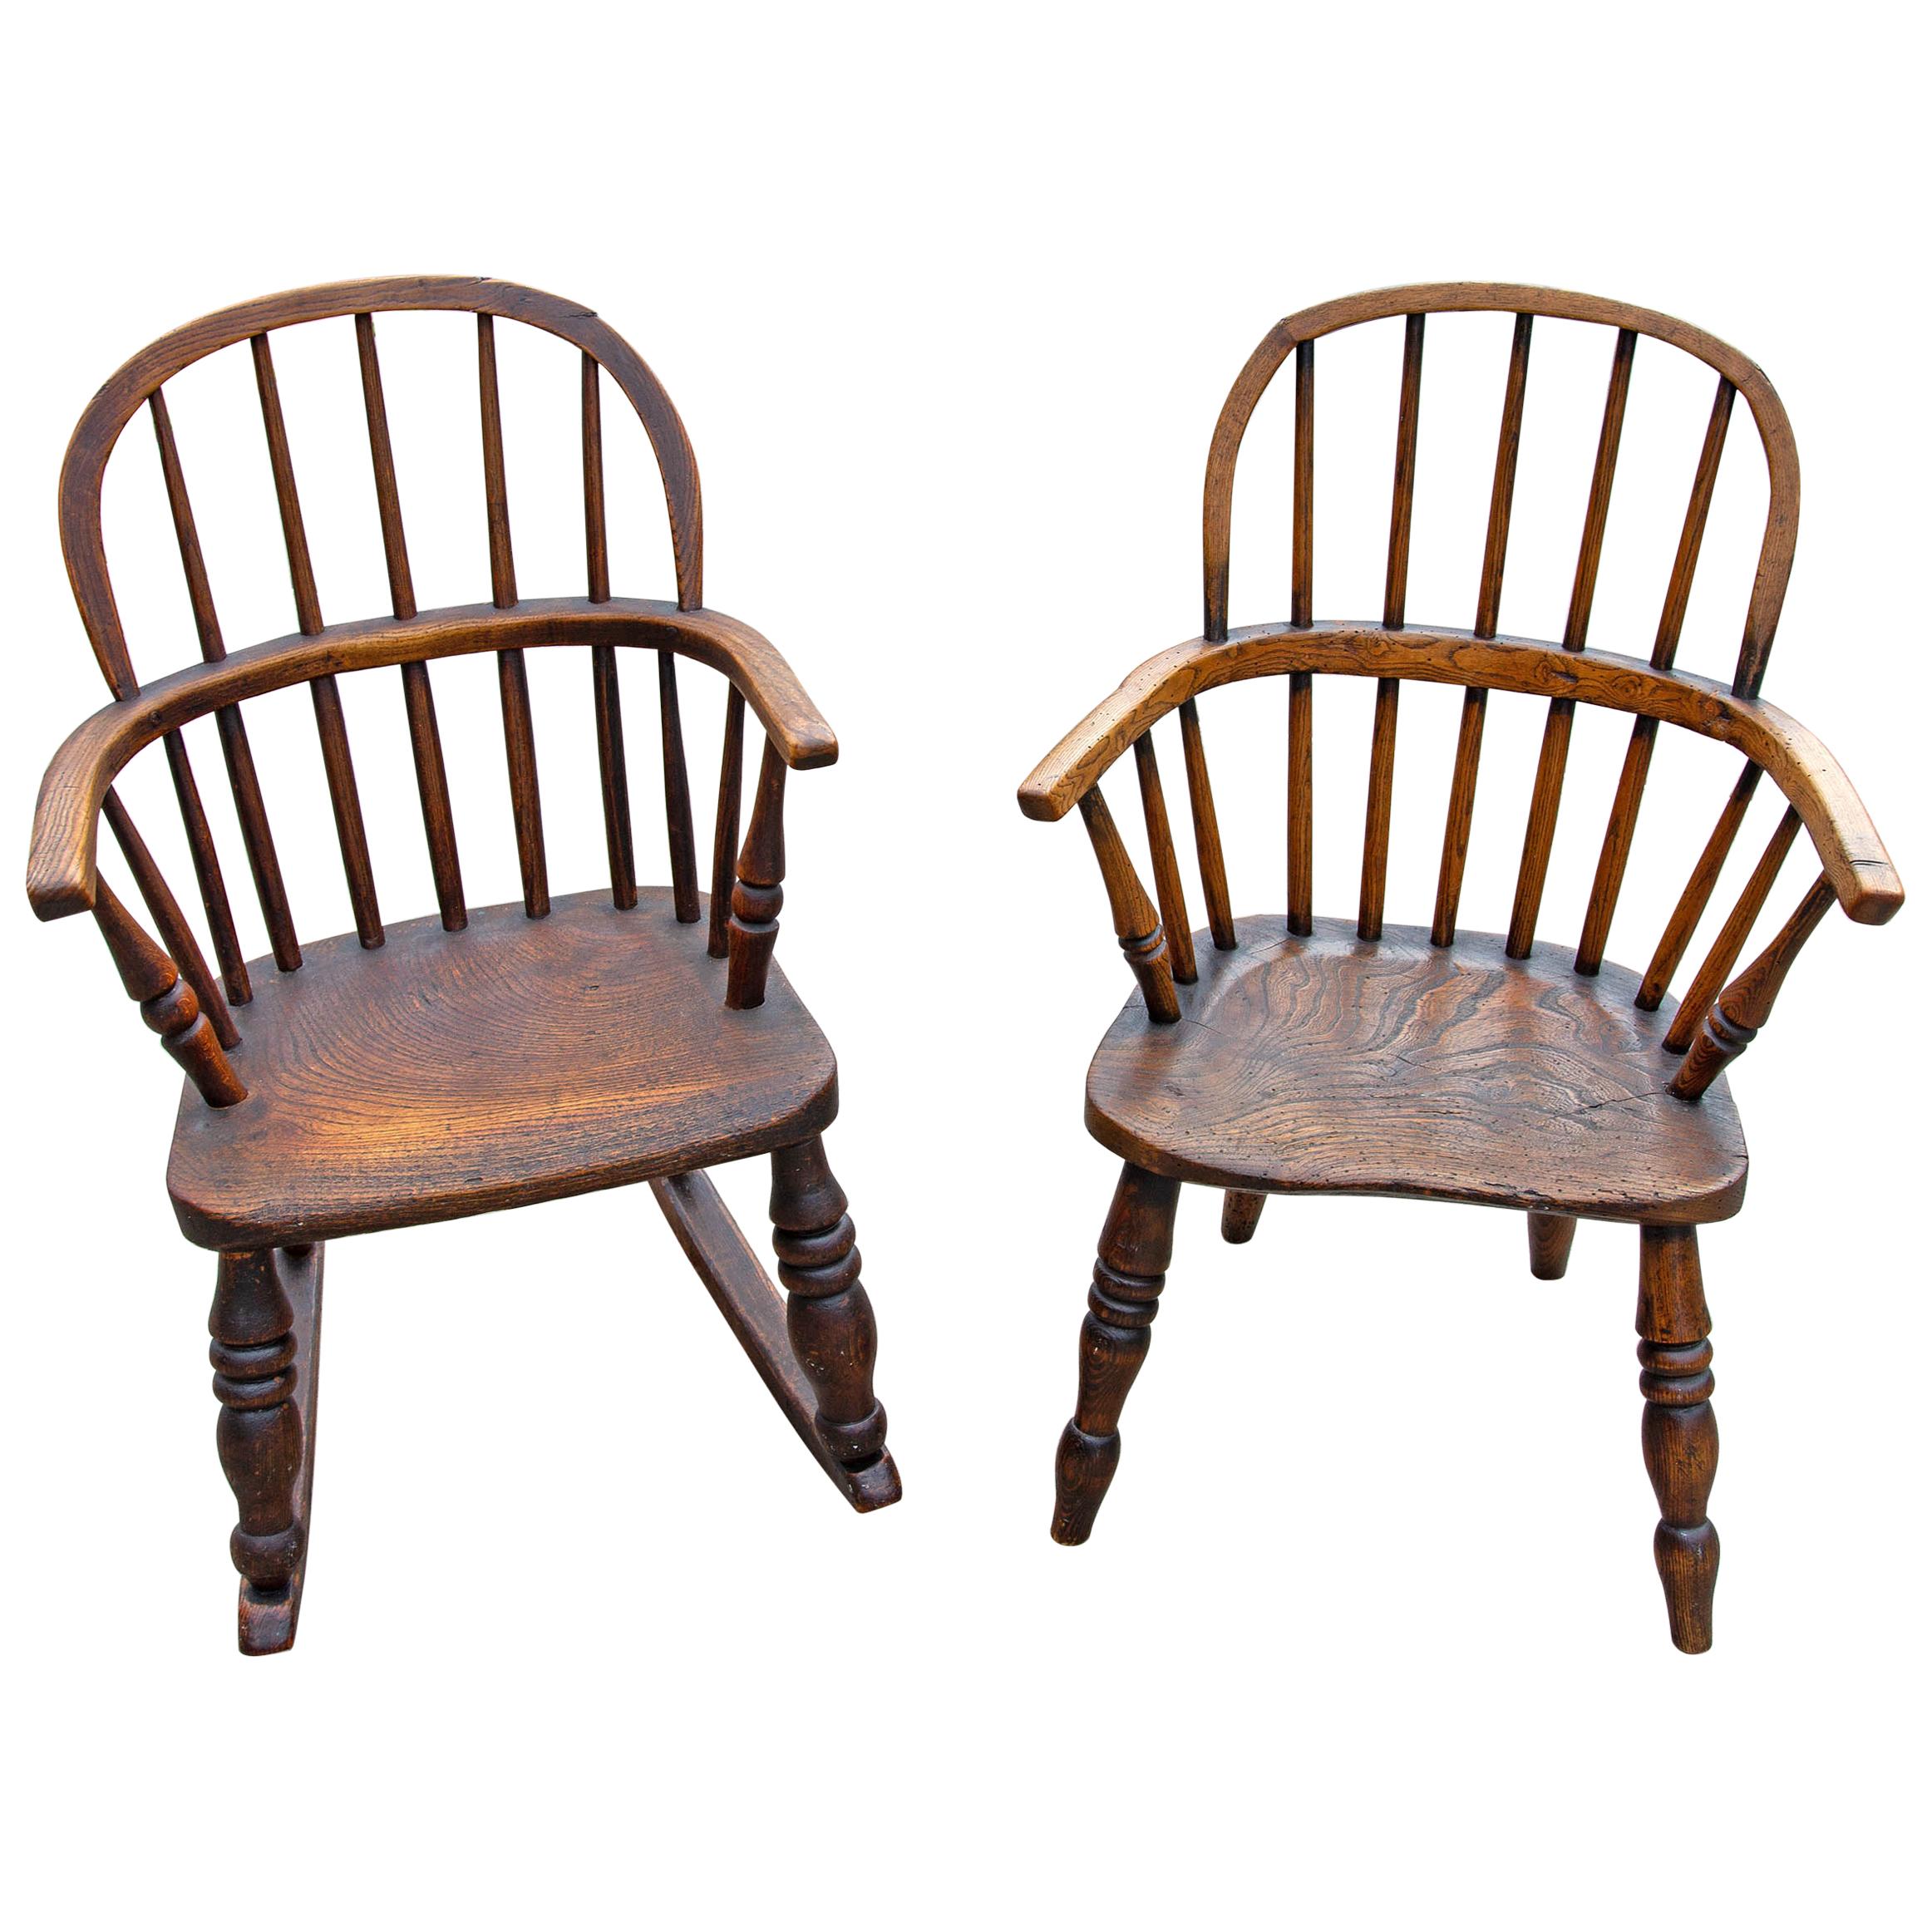 Two English Elm Windsor Children's Chairs